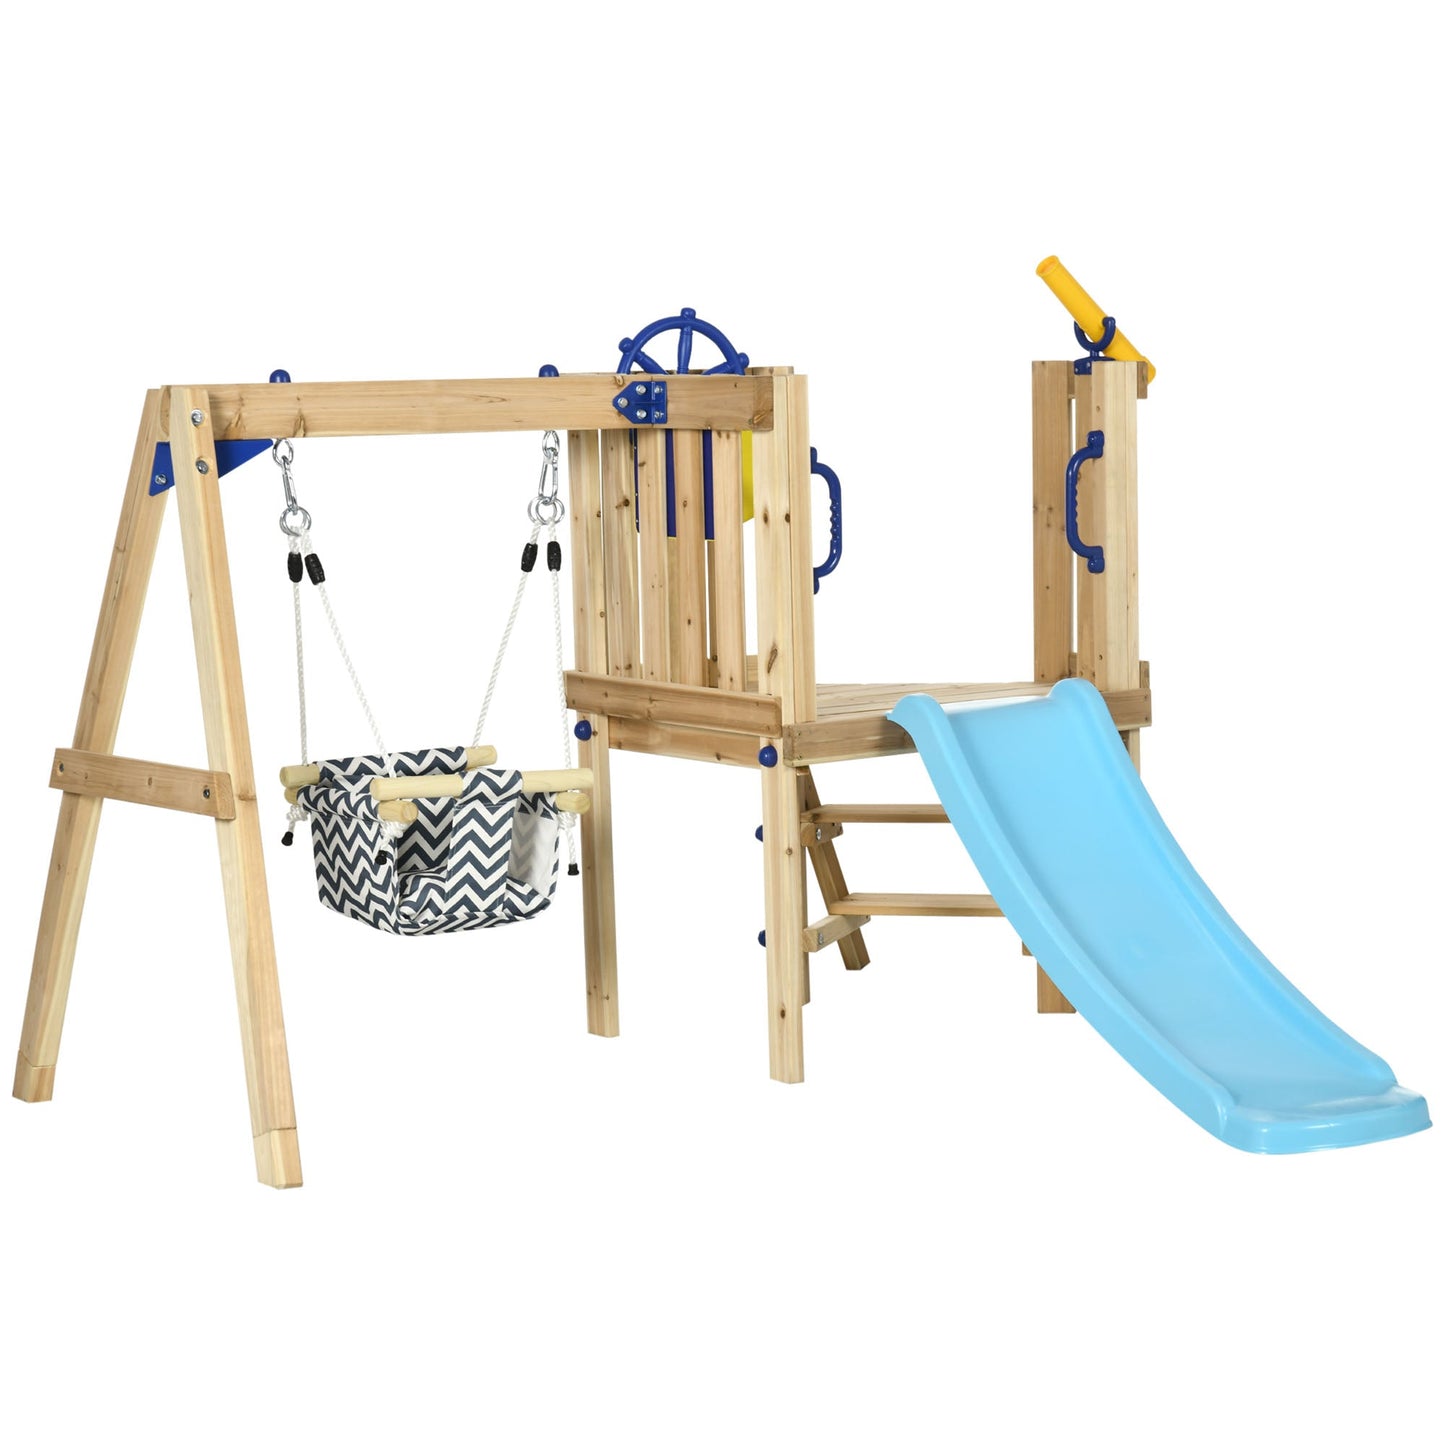 Outdoor and Garden-3 in 1 Wooden Swing Set with Slide, Swing Seat with Fort, Wheel, Telescope & Mailbox, 1.5-4 Years Old, Childrens Outdoor Toys, Natural - Outdoor Style Company